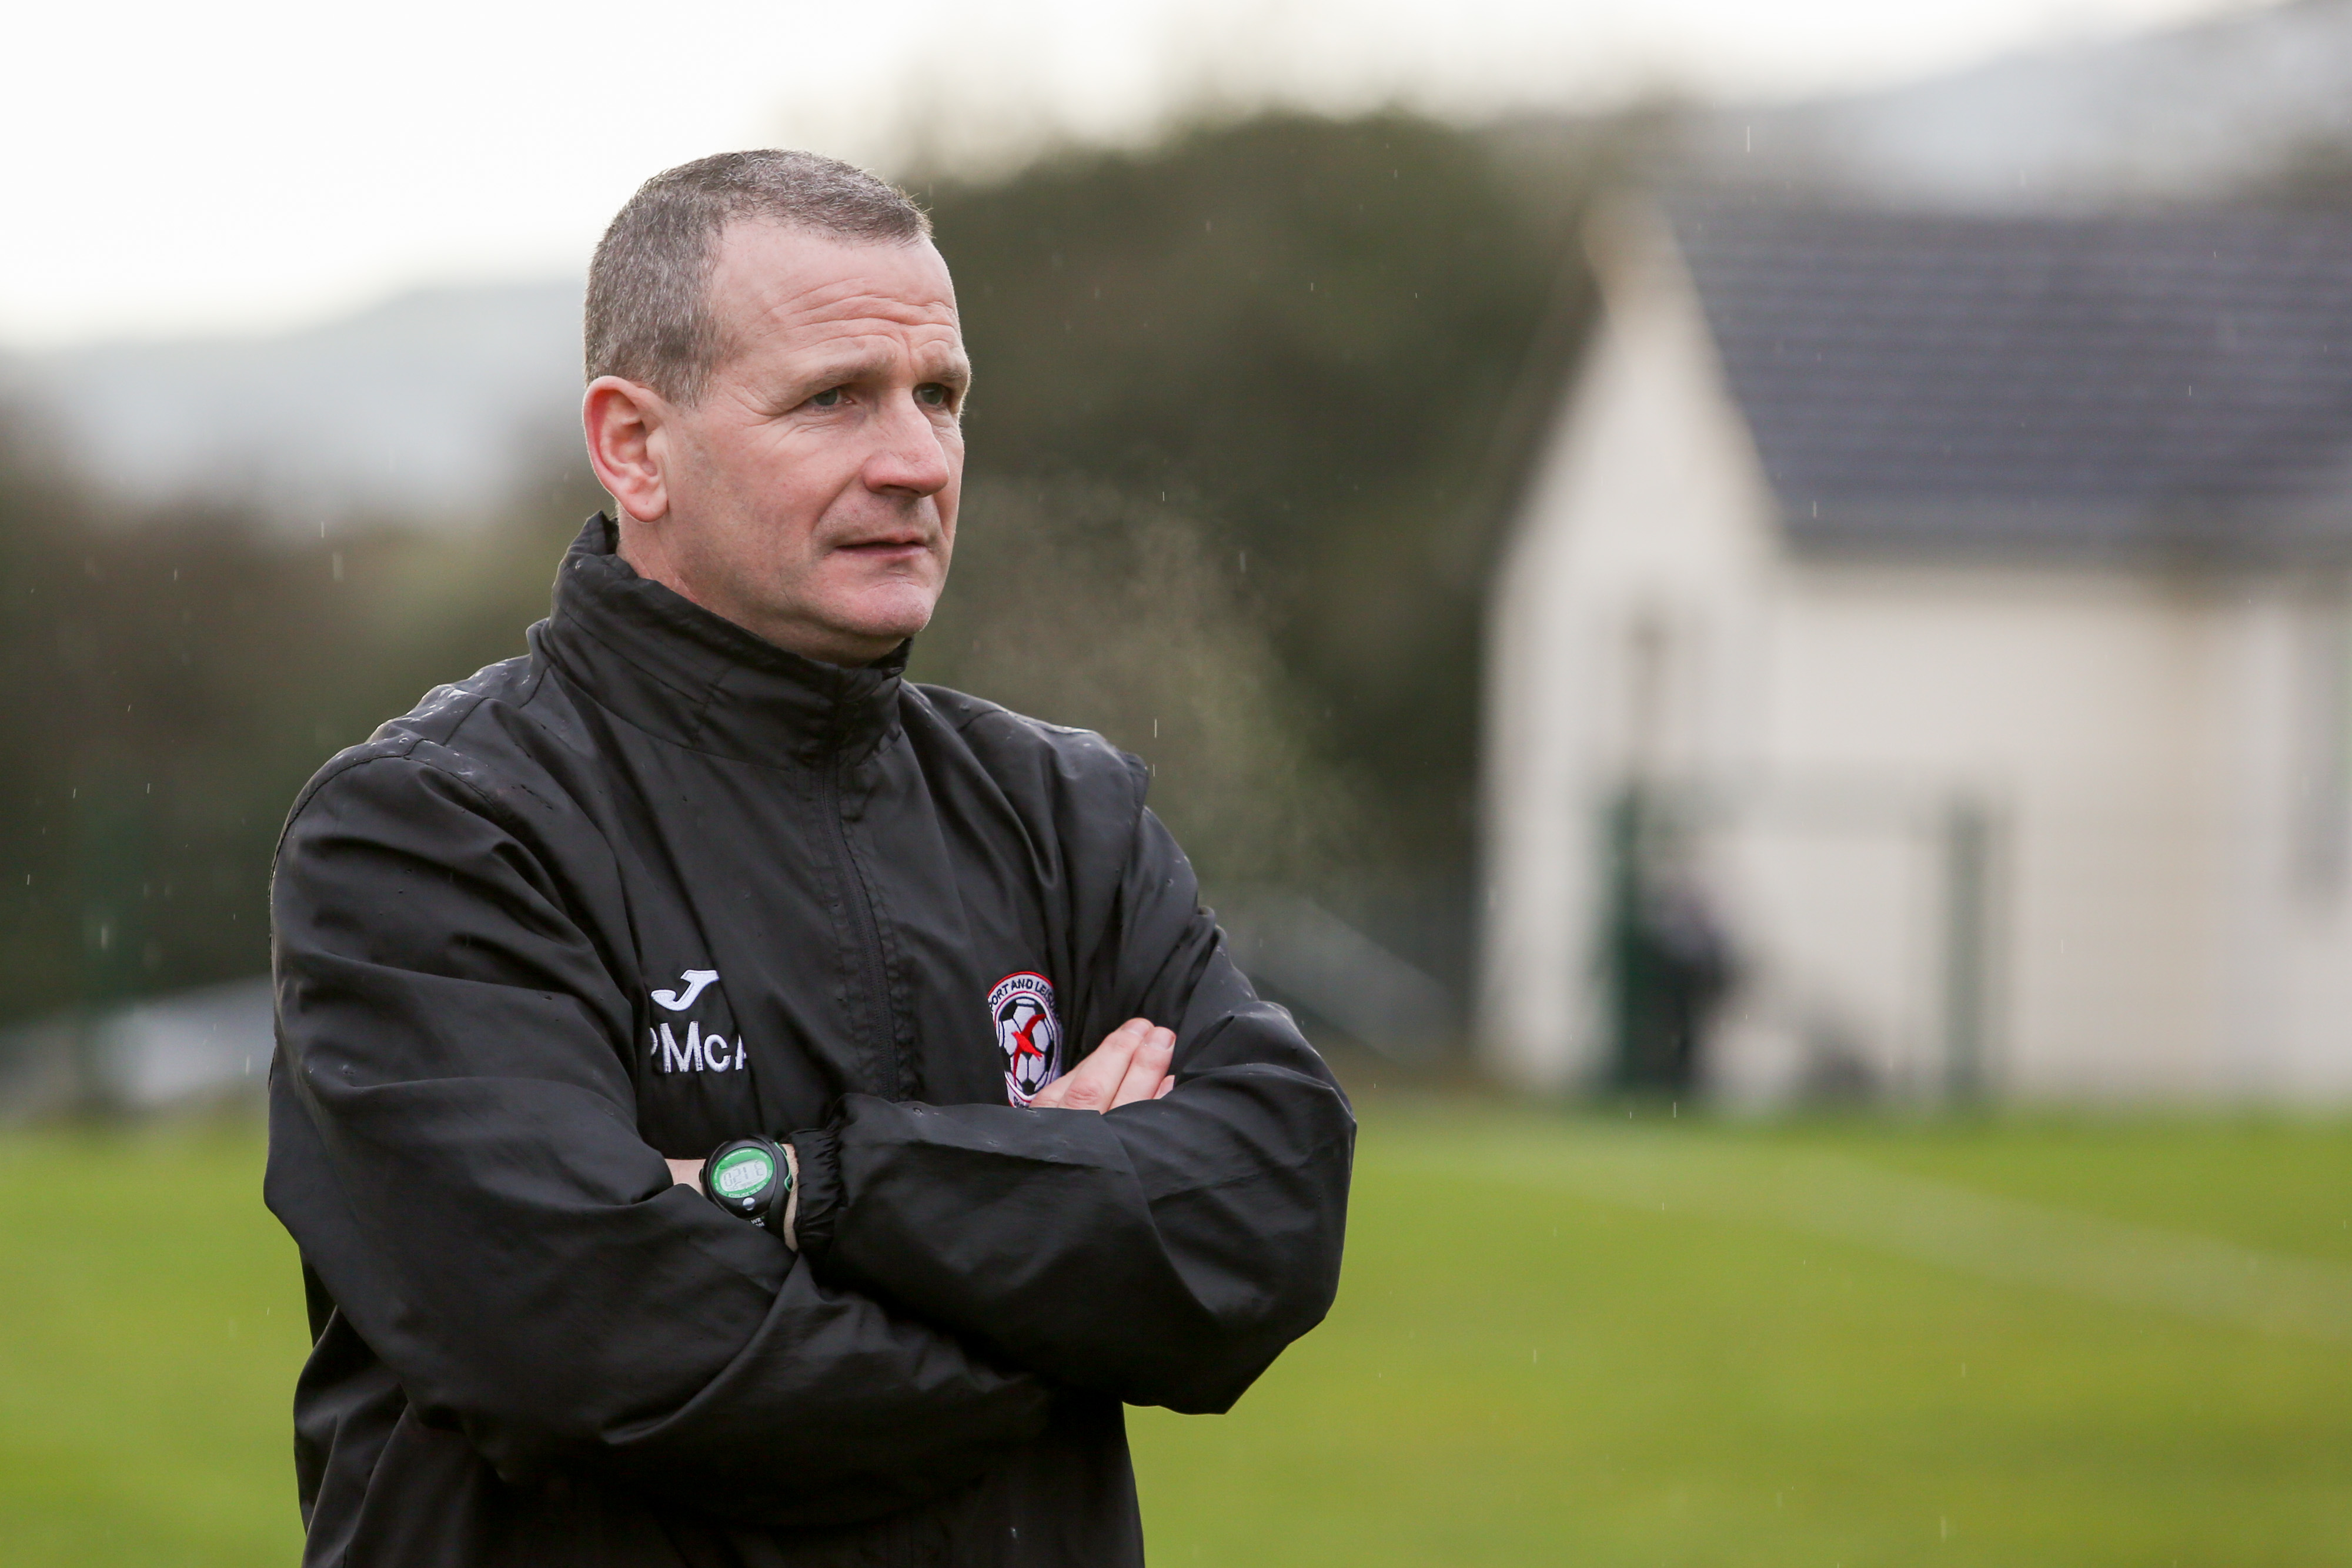 Sport and Leisure boss Packie McAllister is hoping his side can build on last weekend’s win over Bangor when they host local rivals Donegal Celtic on Saturday 